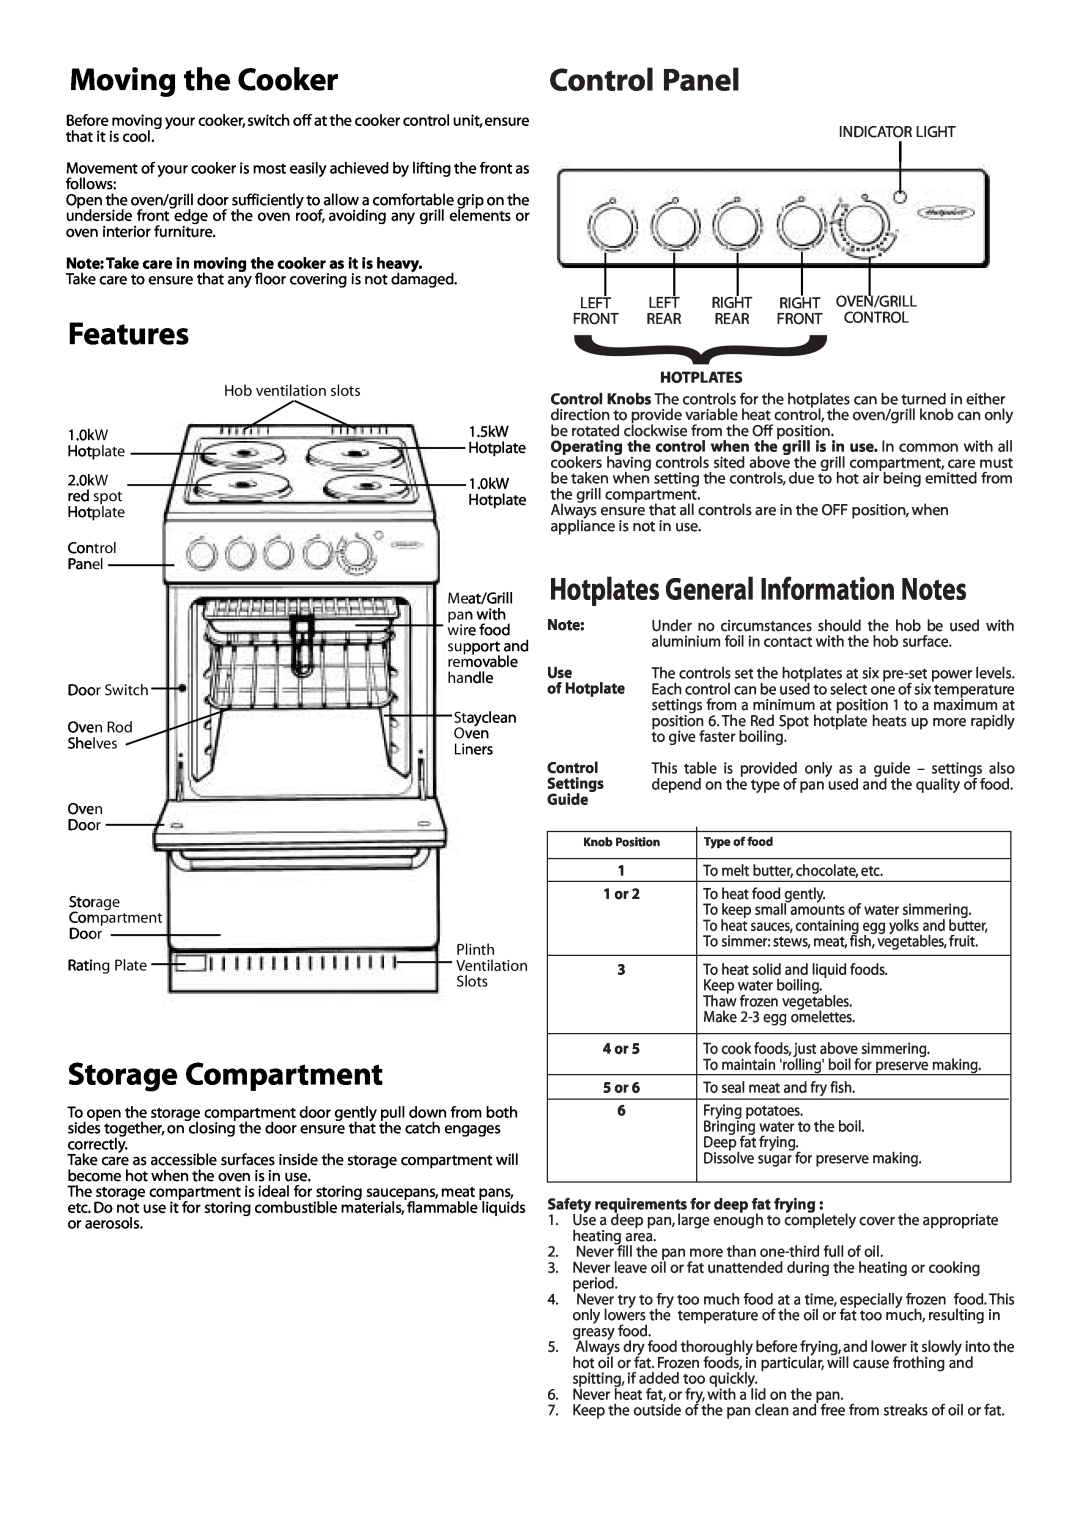 Hotpoint EW11E manual Moving the Cooker, Features, Storage Compartment, Control Panel, Hotplates General Information Notes 